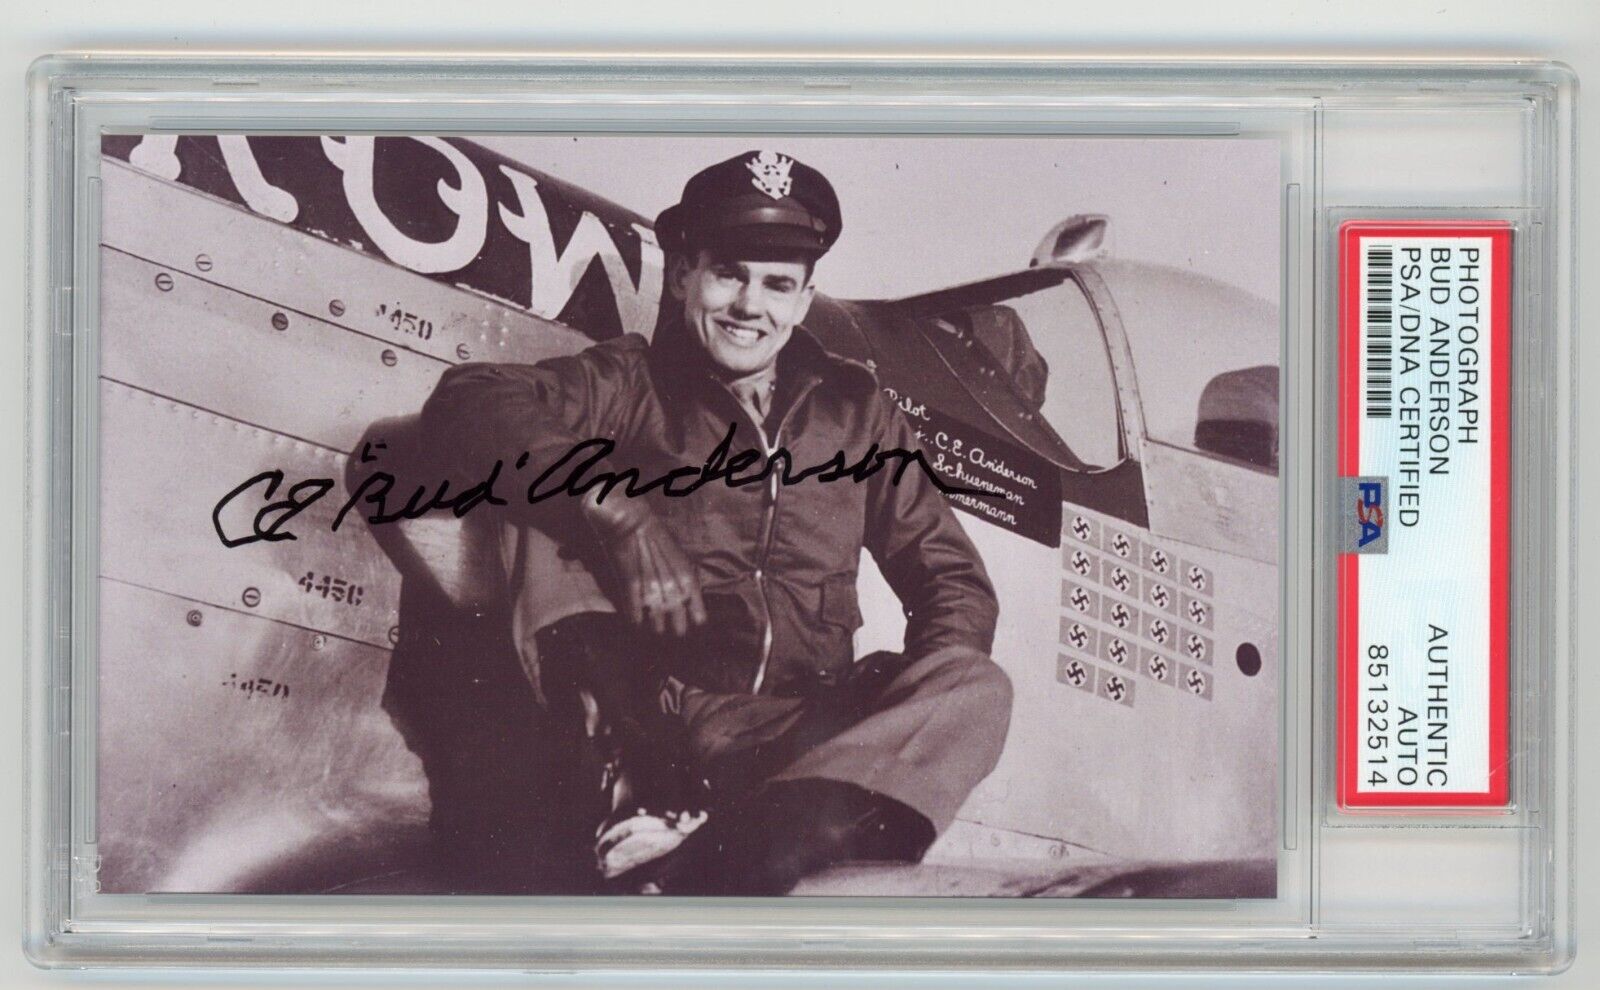 CLARENCE BUD ANDERSON Signed Photo PSA -World War 2 Triple Ace Fighter Pilot